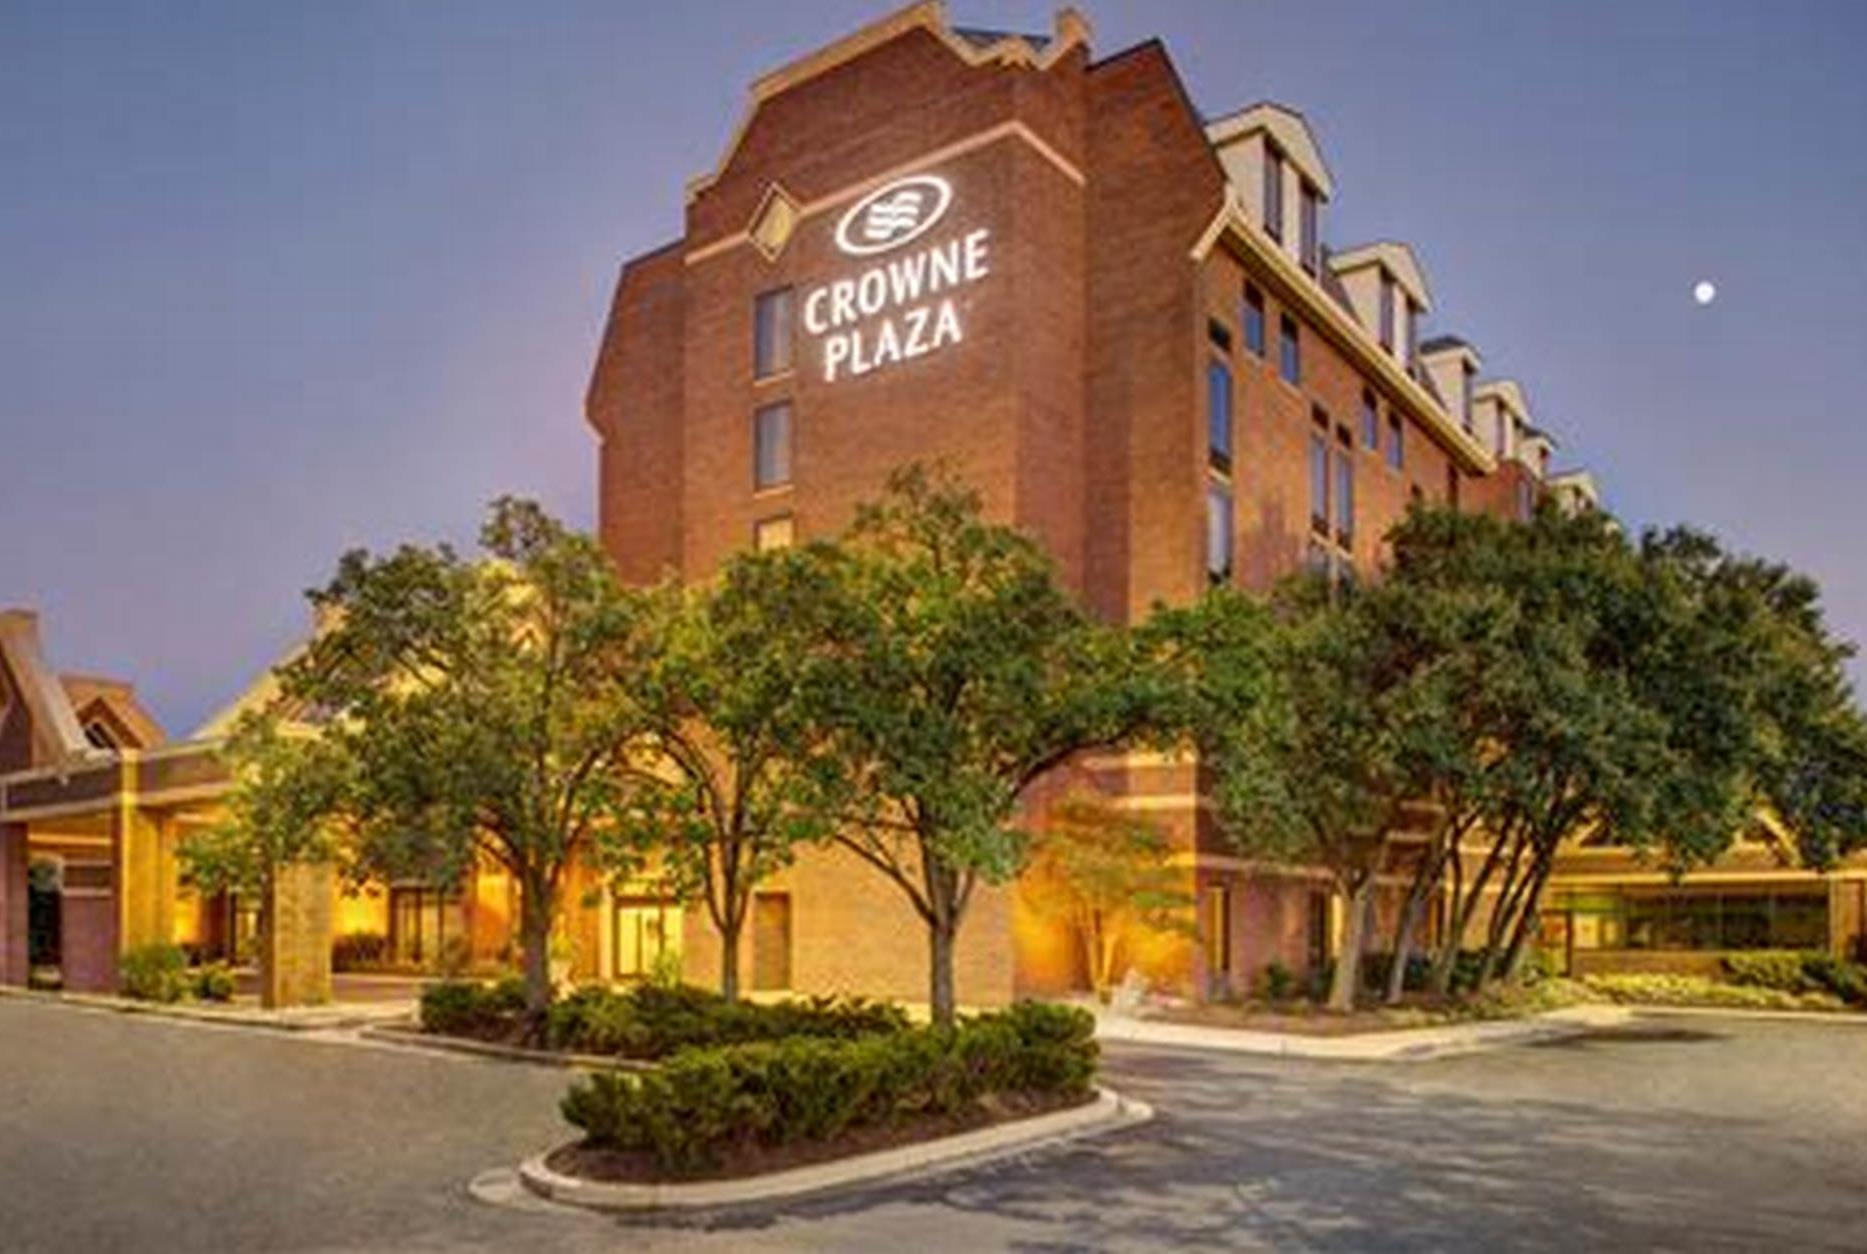 Crowne Plaza Annapolis in Annapolis, MD